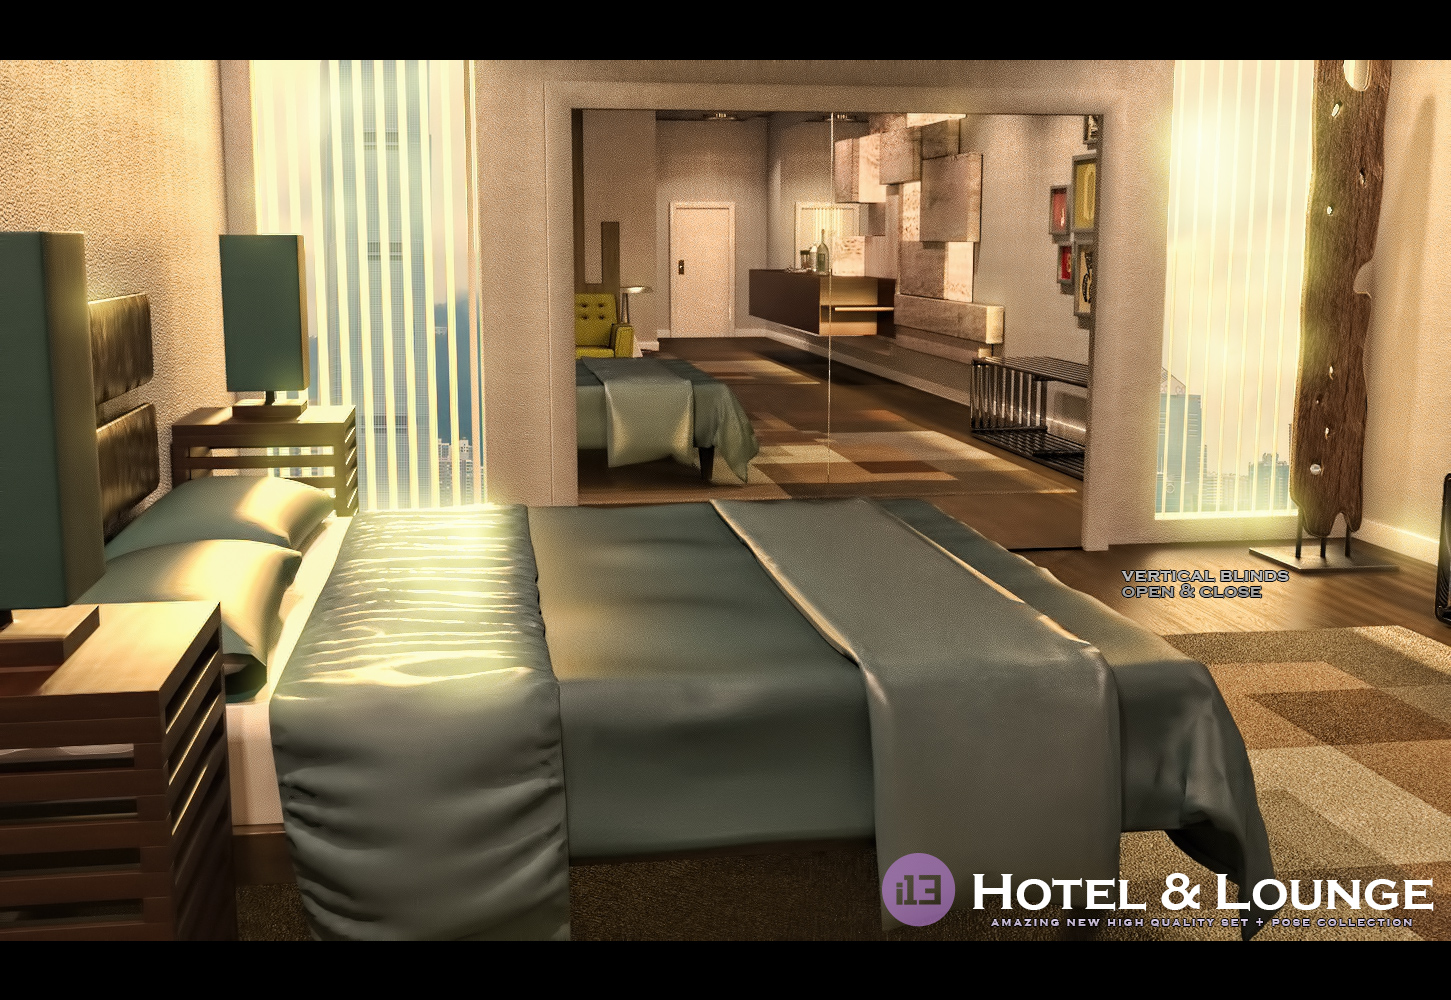 i13 Hotel and Lounge Environment with Poses by: ironman13, 3D Models by Daz 3D